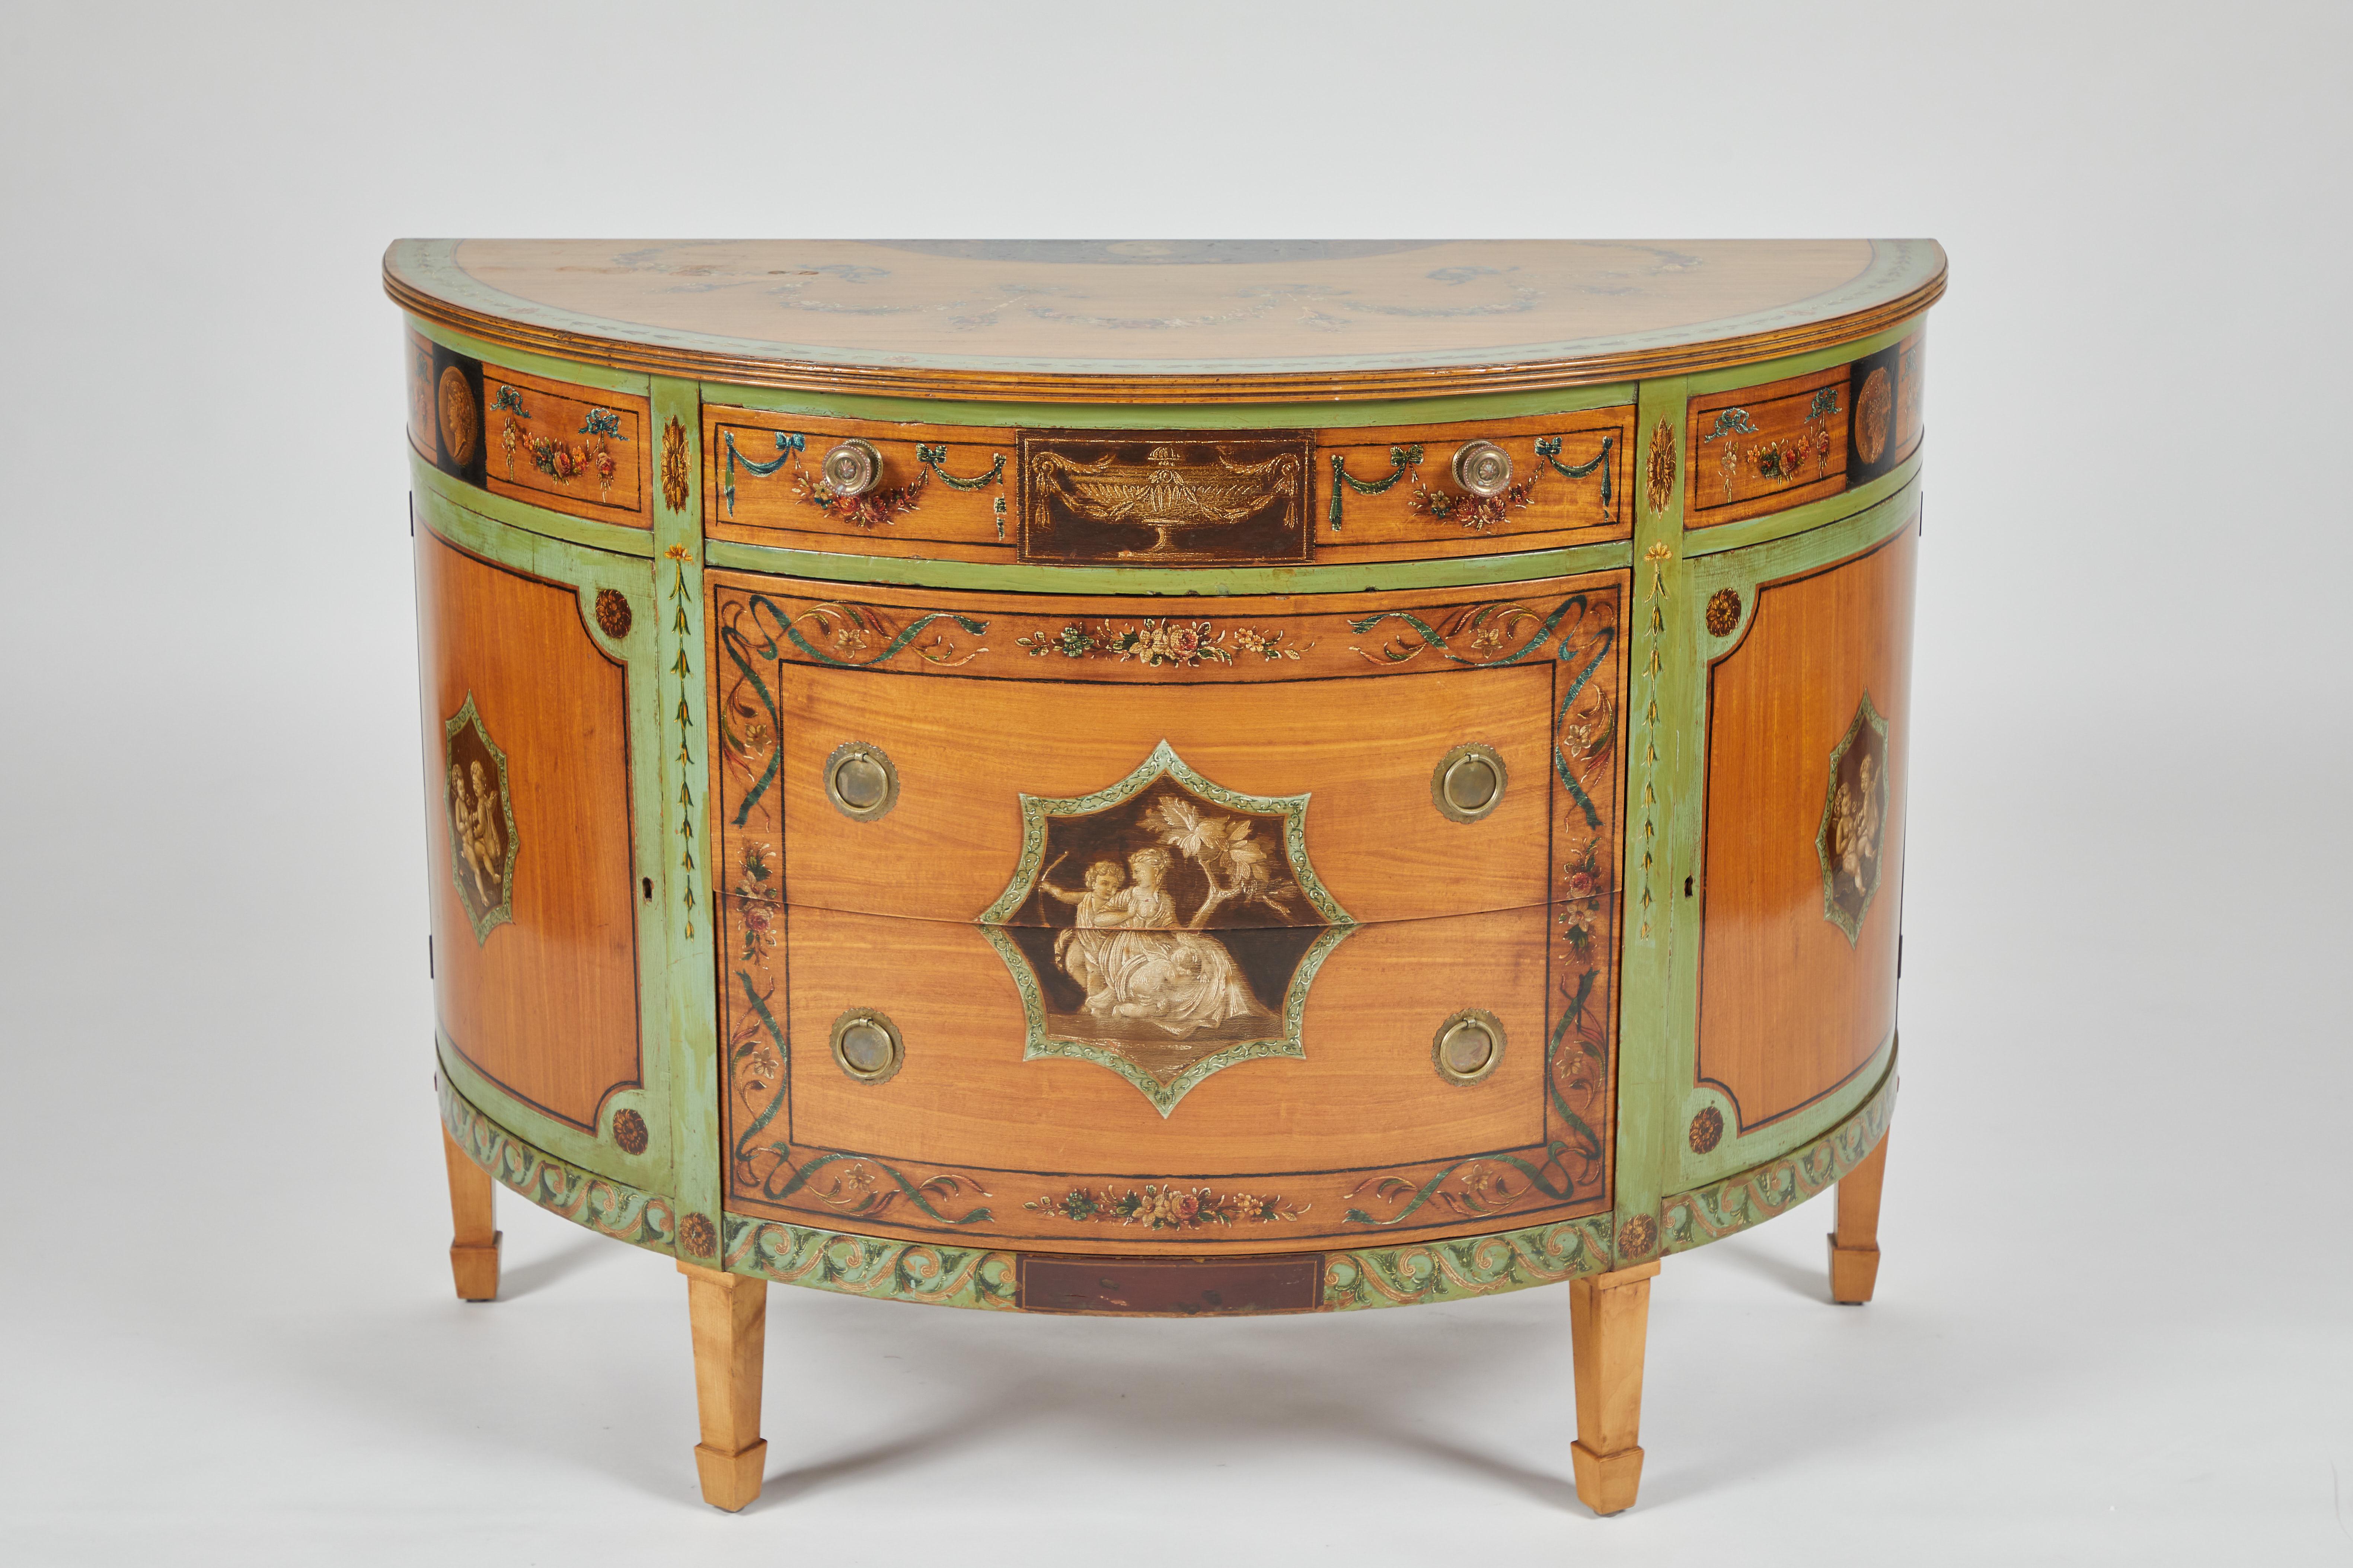 George III style parcel-painted satinwood cabinet. The demilune top centered by a bust in profile, the front with a central figure with a cupid at her side and a putti at her knees surmounted by an urn draped with swags of foliage, the conforming